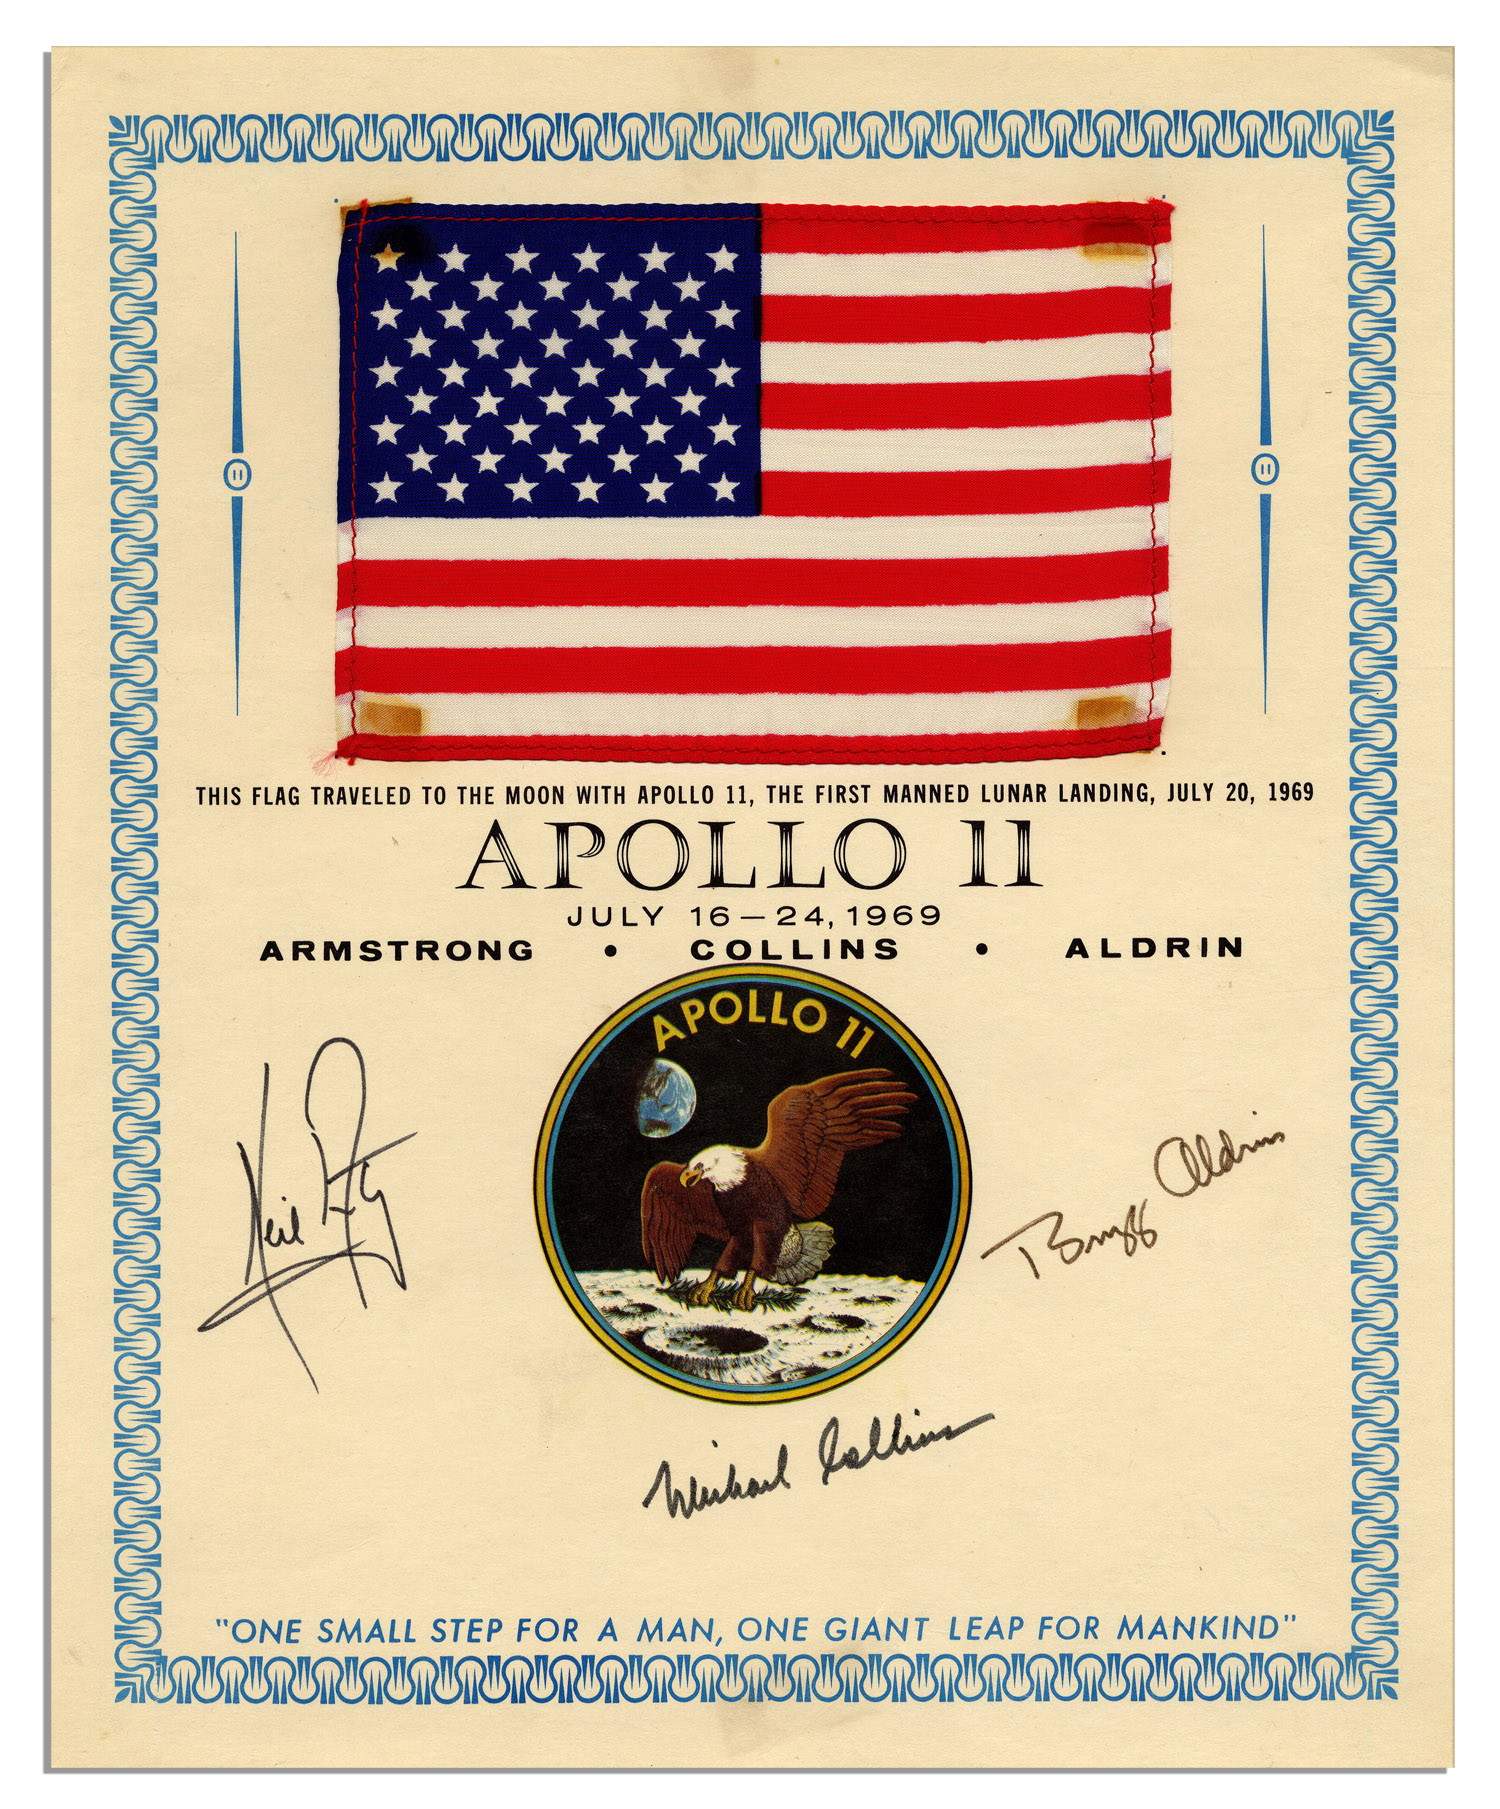 Science Autographs Apollo 11 Flag Flown to the Moon Exceptionally Scarce Apollo 11 Flag Flown to the Moon -- Signed by Armstrong, Aldrin & Collins